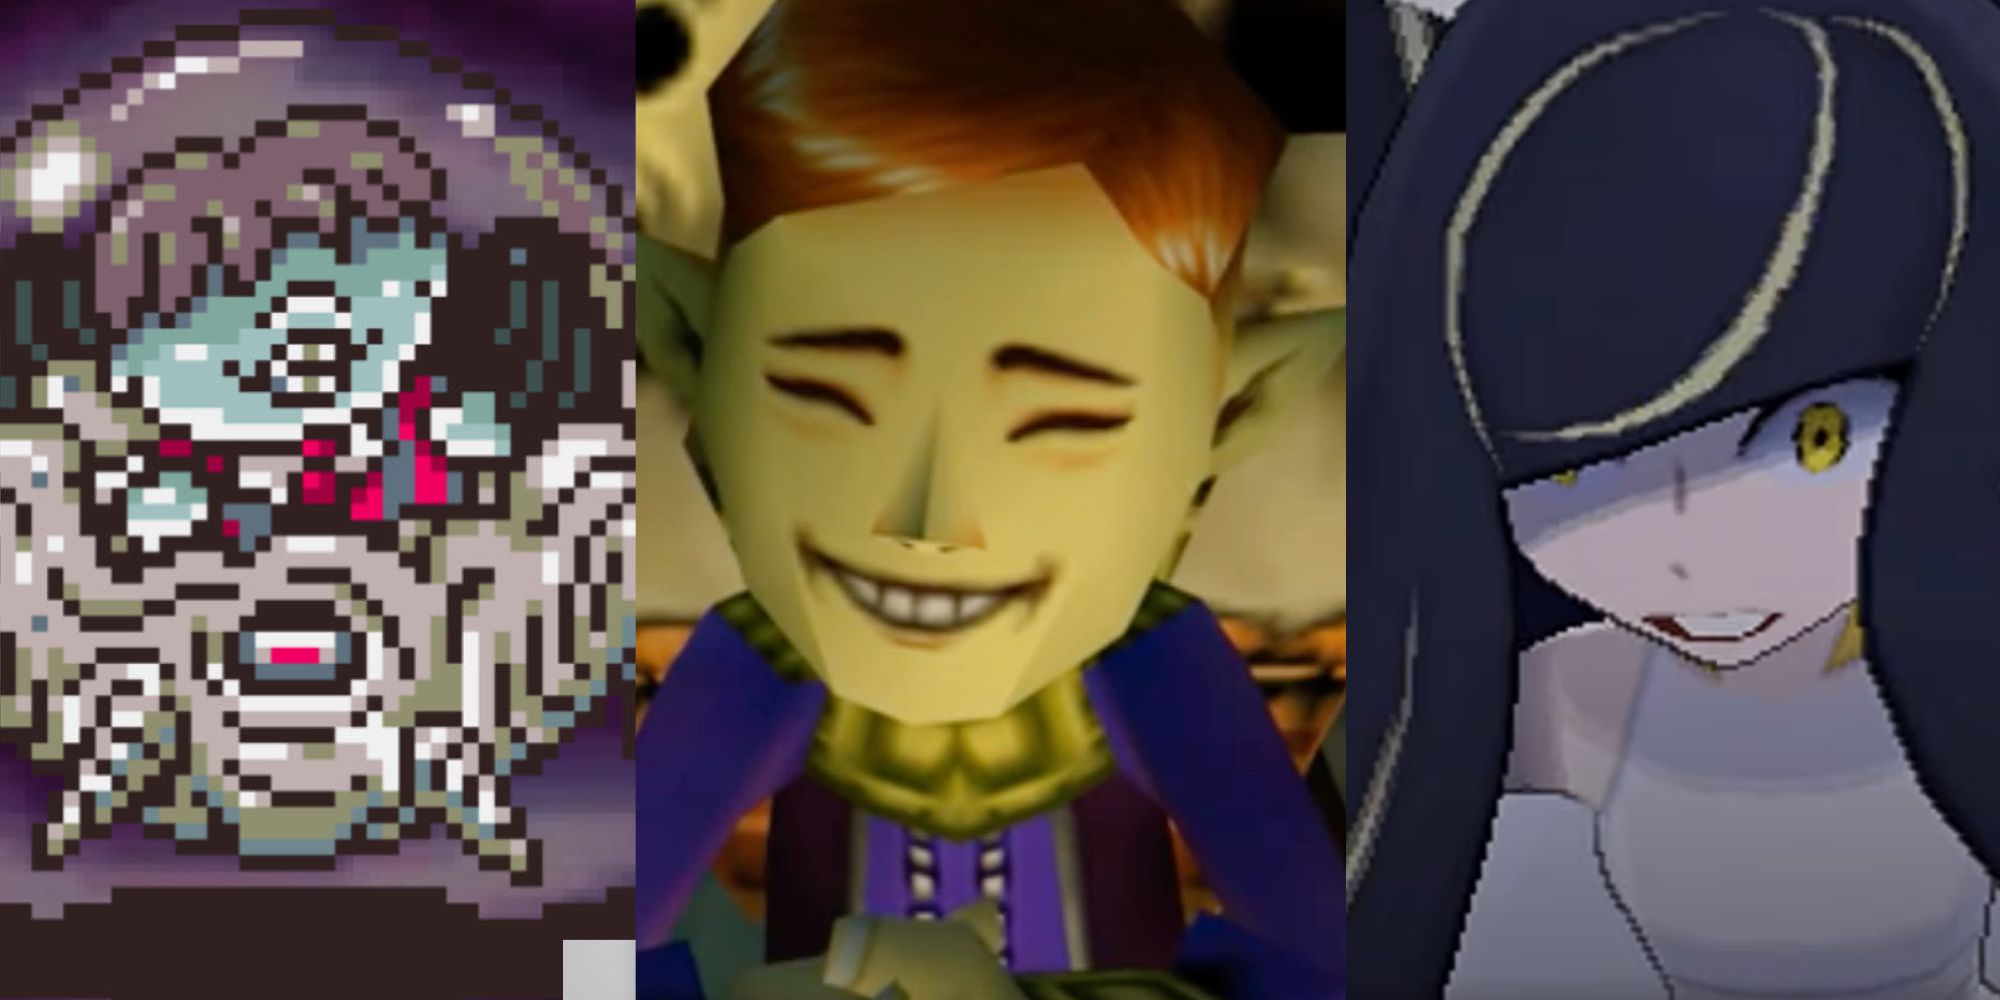 Porky in his spider mech; the Happy Mask Salesman smiling; Lusamine in Mother Beast form